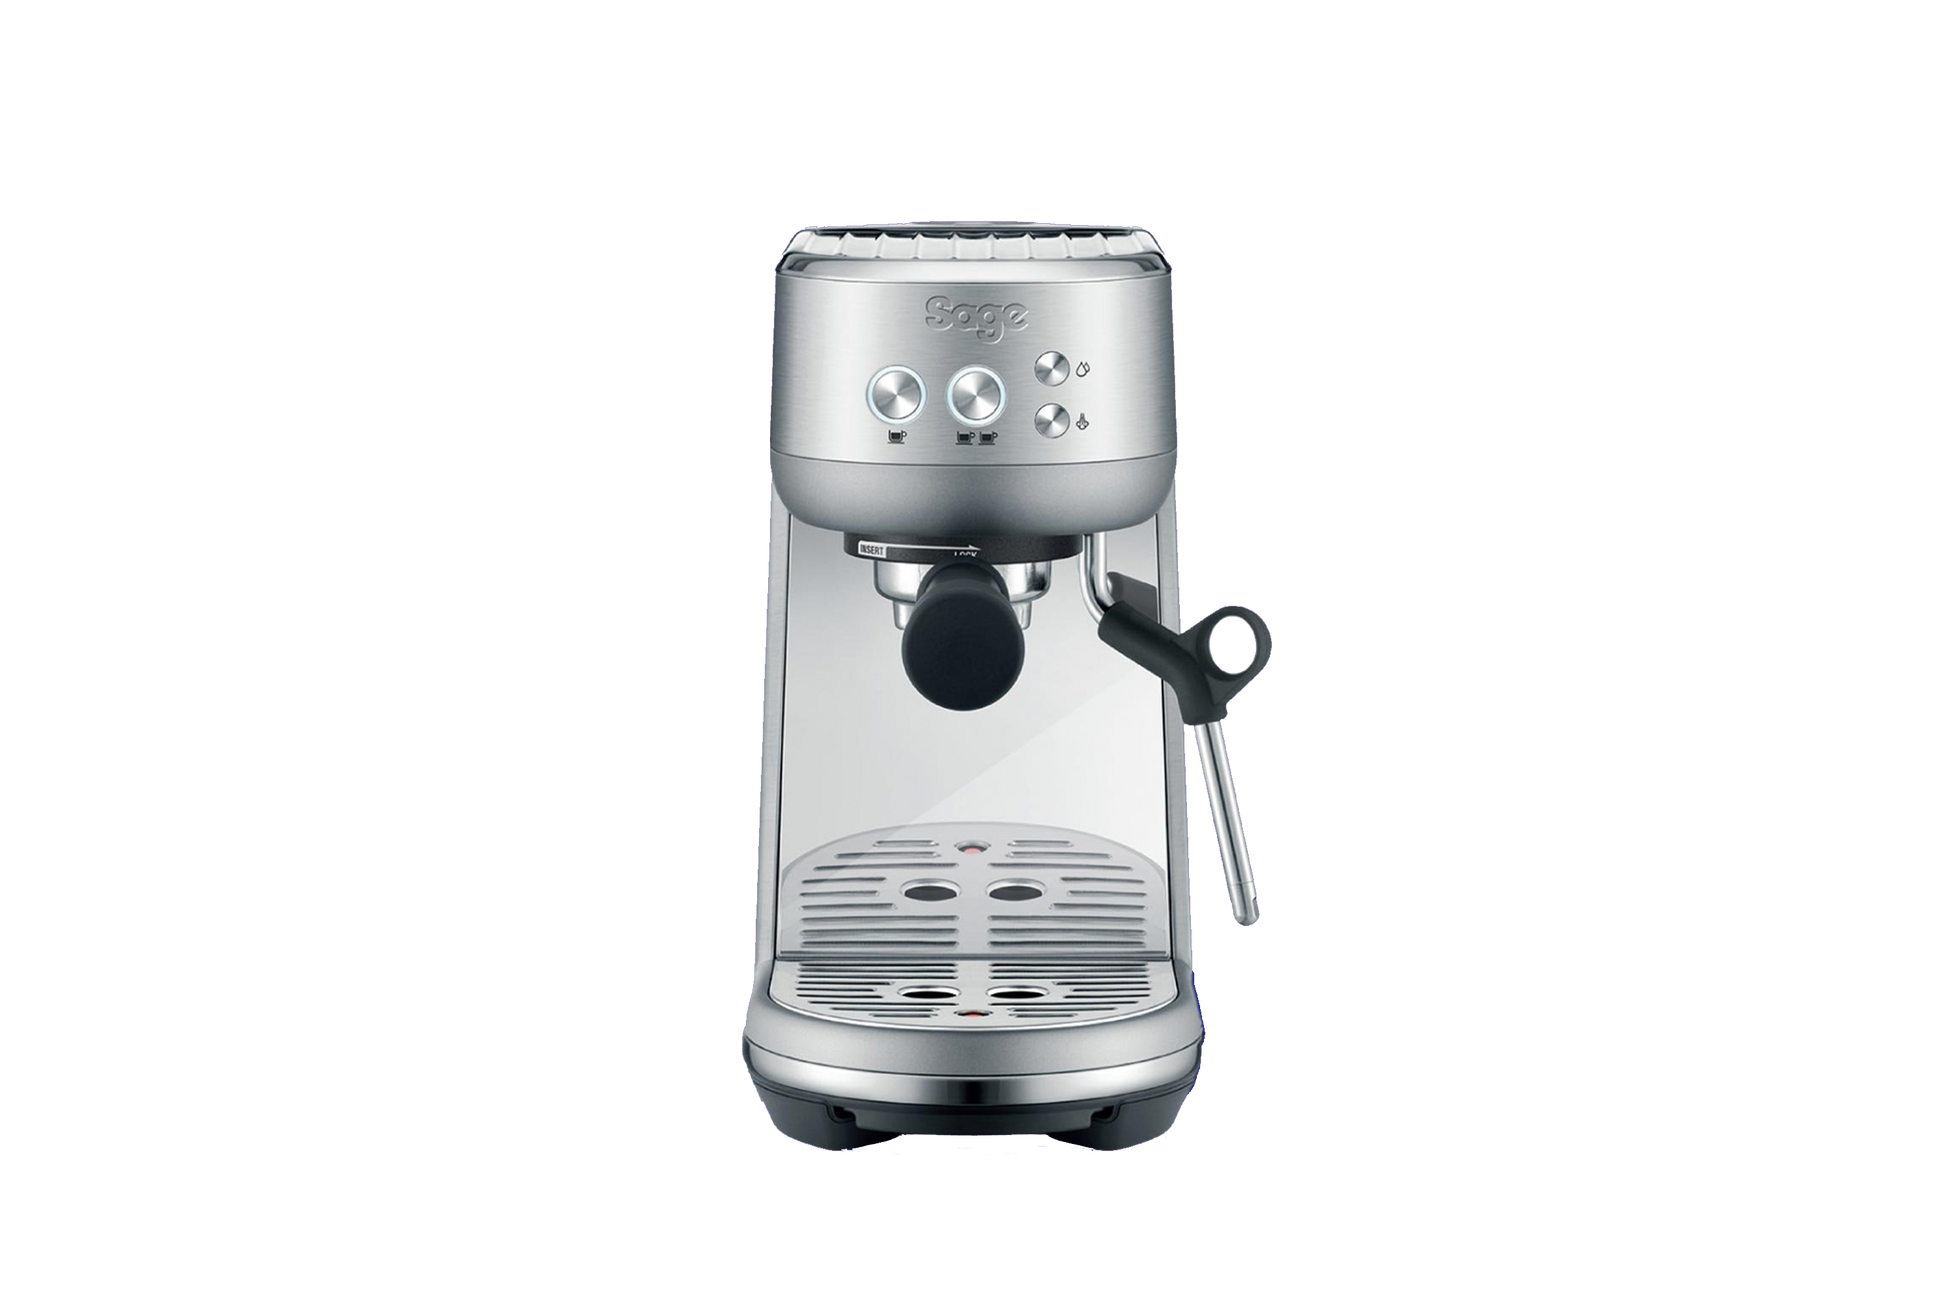 This compact home espresso machine is small in price & footprint, but mighty in its ability to deliver consistently delicious espresso and milk drinks at the kitchen counter.